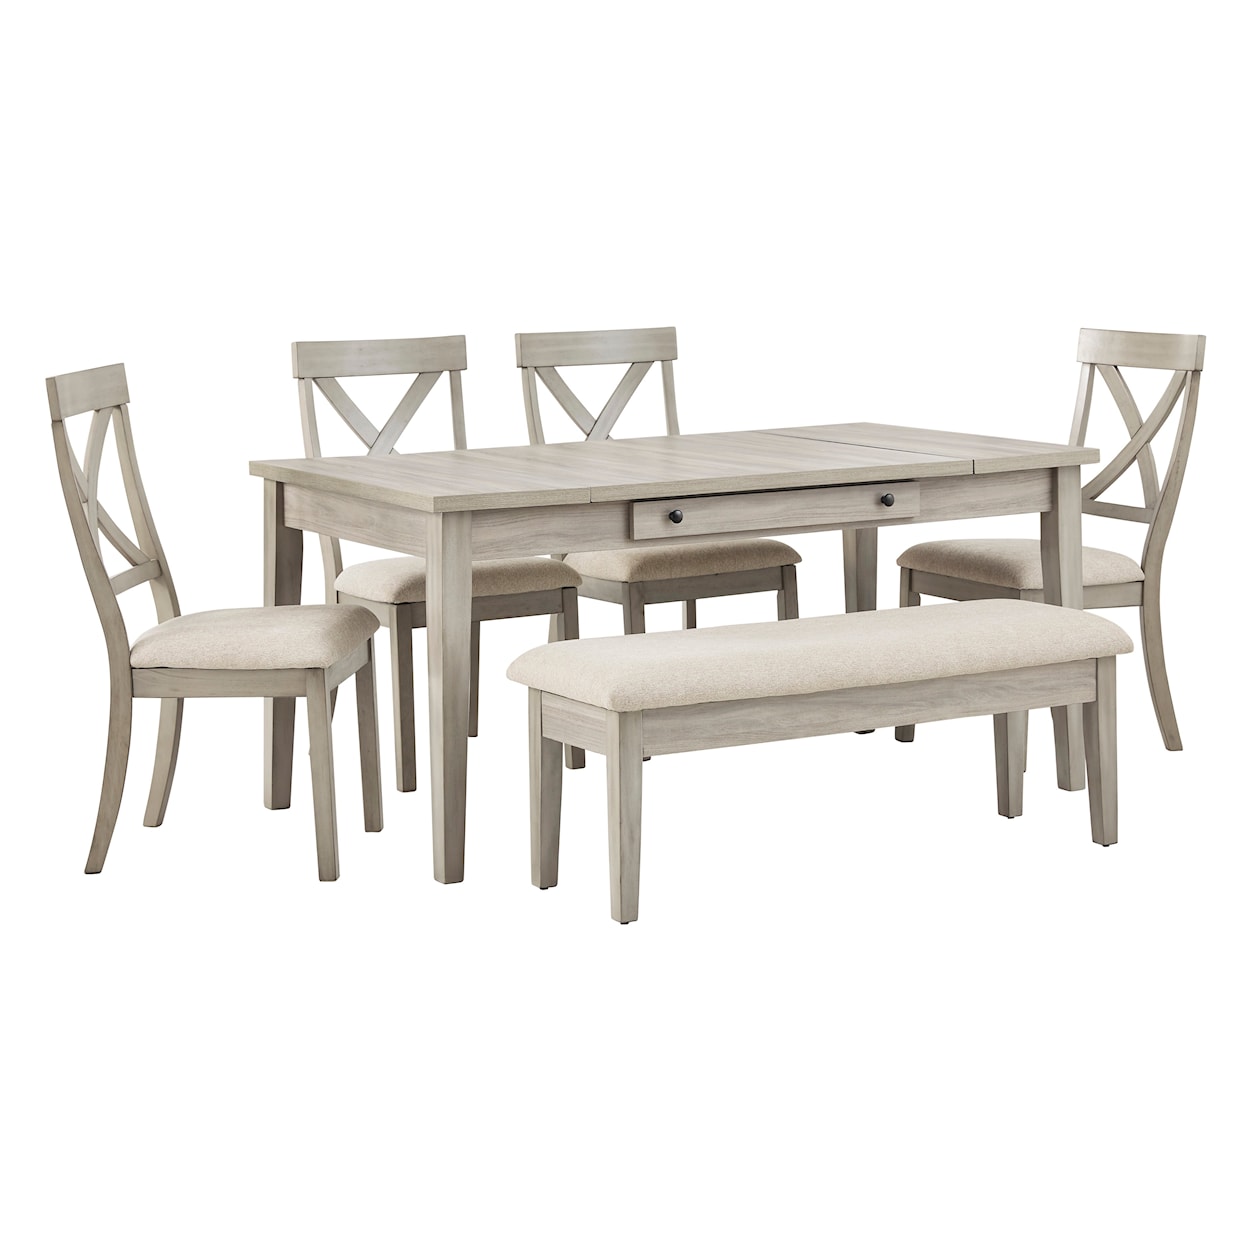 Ashley Furniture Signature Design Parellen 6-Piece Table and Chair Set with Bench